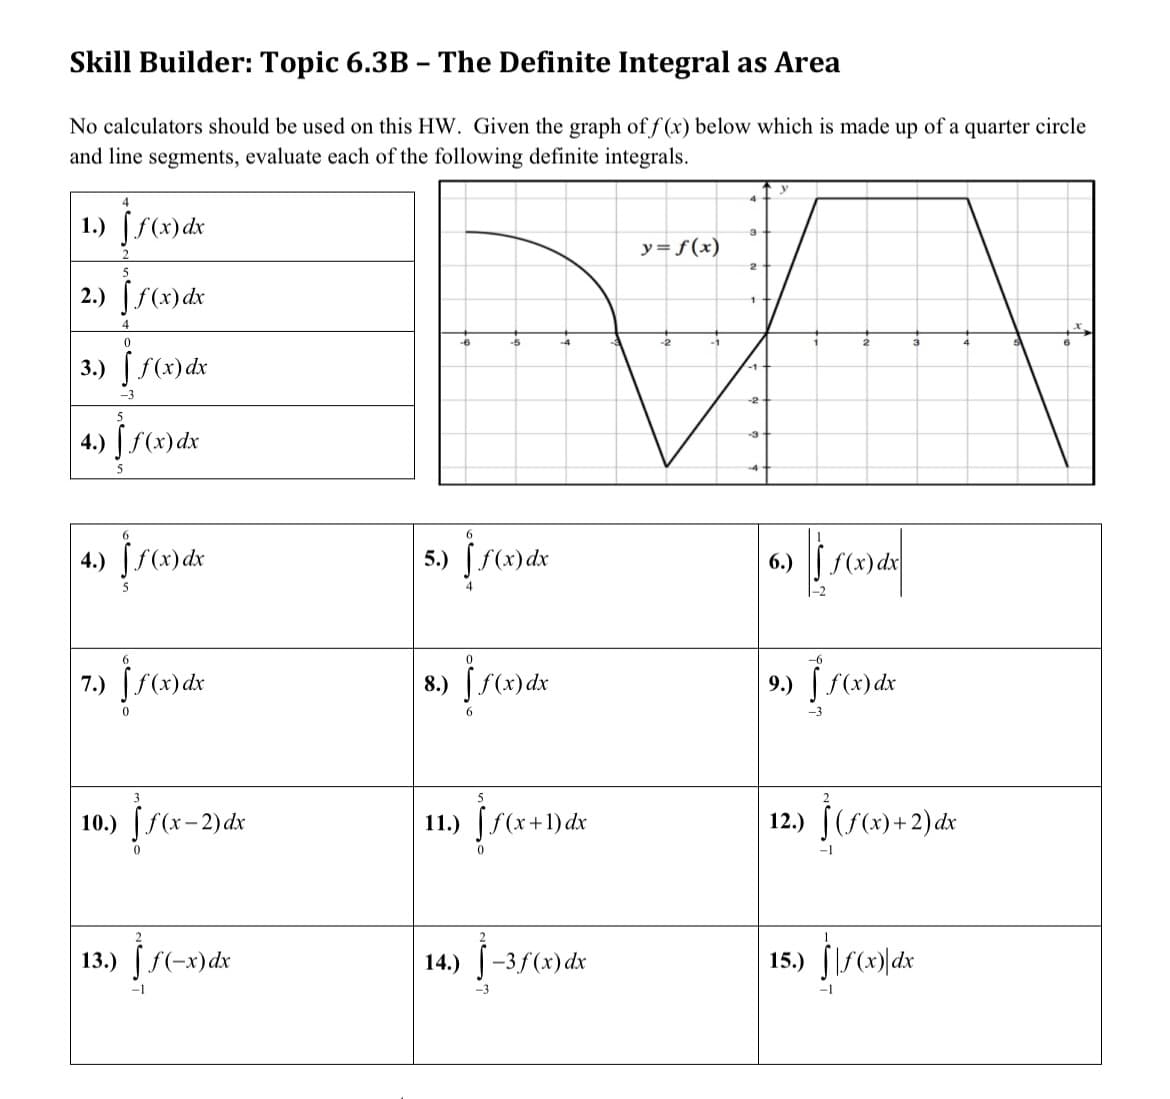 Skill Builder: Topic 6.3B - The Definite Integral as Area
No calculators should be used on this HW. Given the graph of f(x) below which is made up of a quarter circle
and line segments, evaluate each of the following definite integrals.
1.) ff(x) dx
5
2.) [f(x) dx
0
3.) [ f(x) dx
4.) f(x) dx
4.)
4
10.)
f(x) dx
7.) f(x) dx
f(x-2) dx
13.) f(-x) dx
-1
6
y
y = f(x)
2
VN
-2
2
3
-1
-2
-3
5.) ff(x) dx
8.) f(x) dx
11.) ff(x+1) dx
14.) Ĵ-3 f(x) dx
6.)
f(x) dx
9.) f(x) dx
-3
12.) j(f(x)+2) dx
15.) ||ƒ(x)|dx